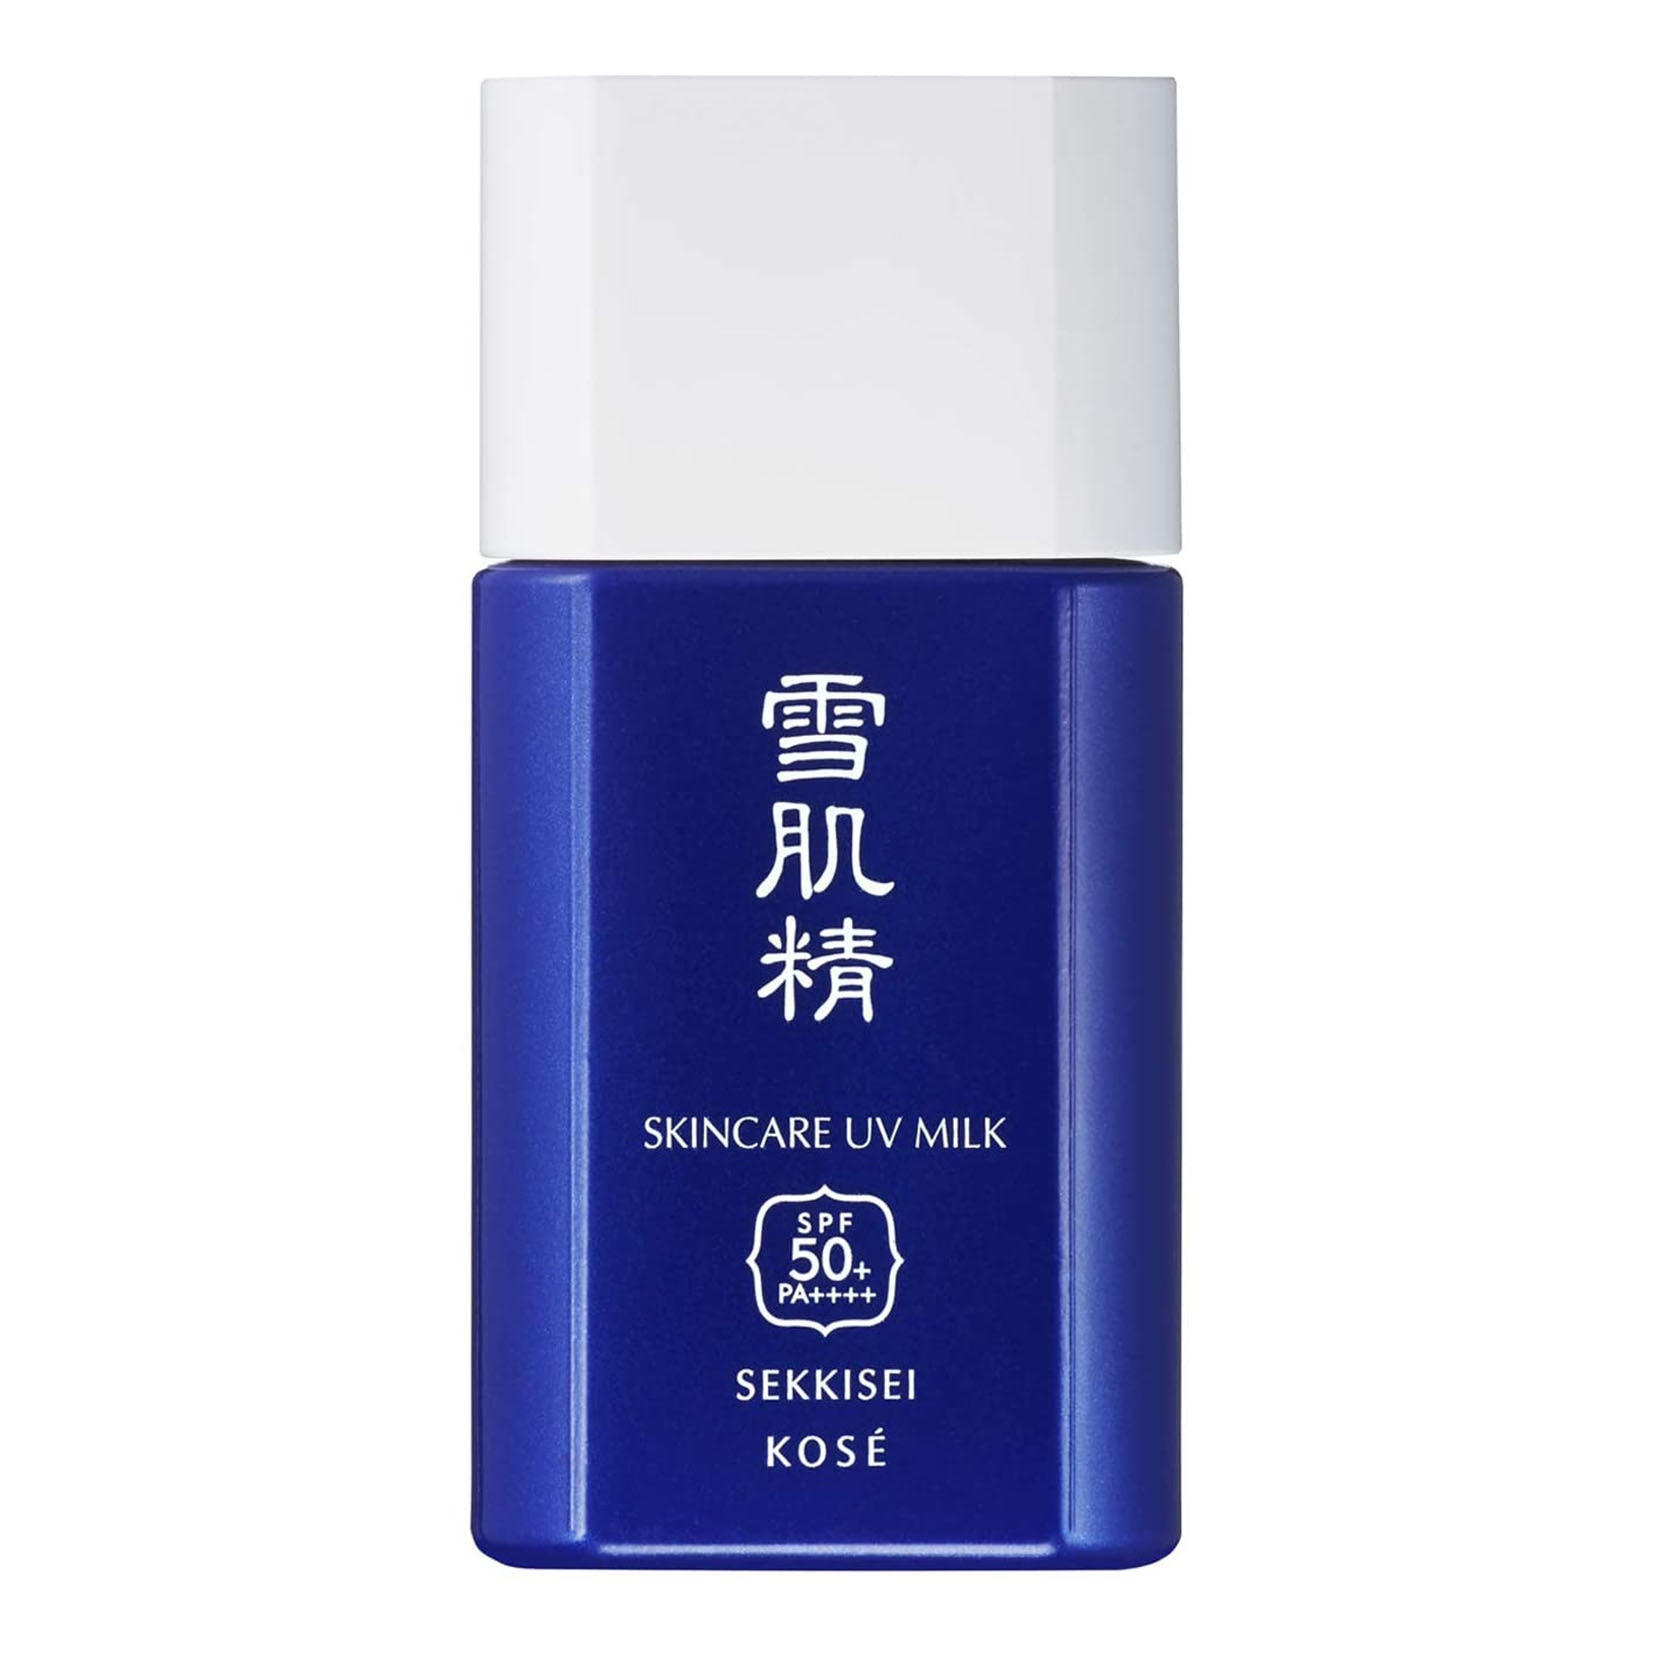 Sekkisei UV Sun Protection Essence Milk- 25g - Harajuku Culture Japan - Japanease Products Store Beauty and Stationery